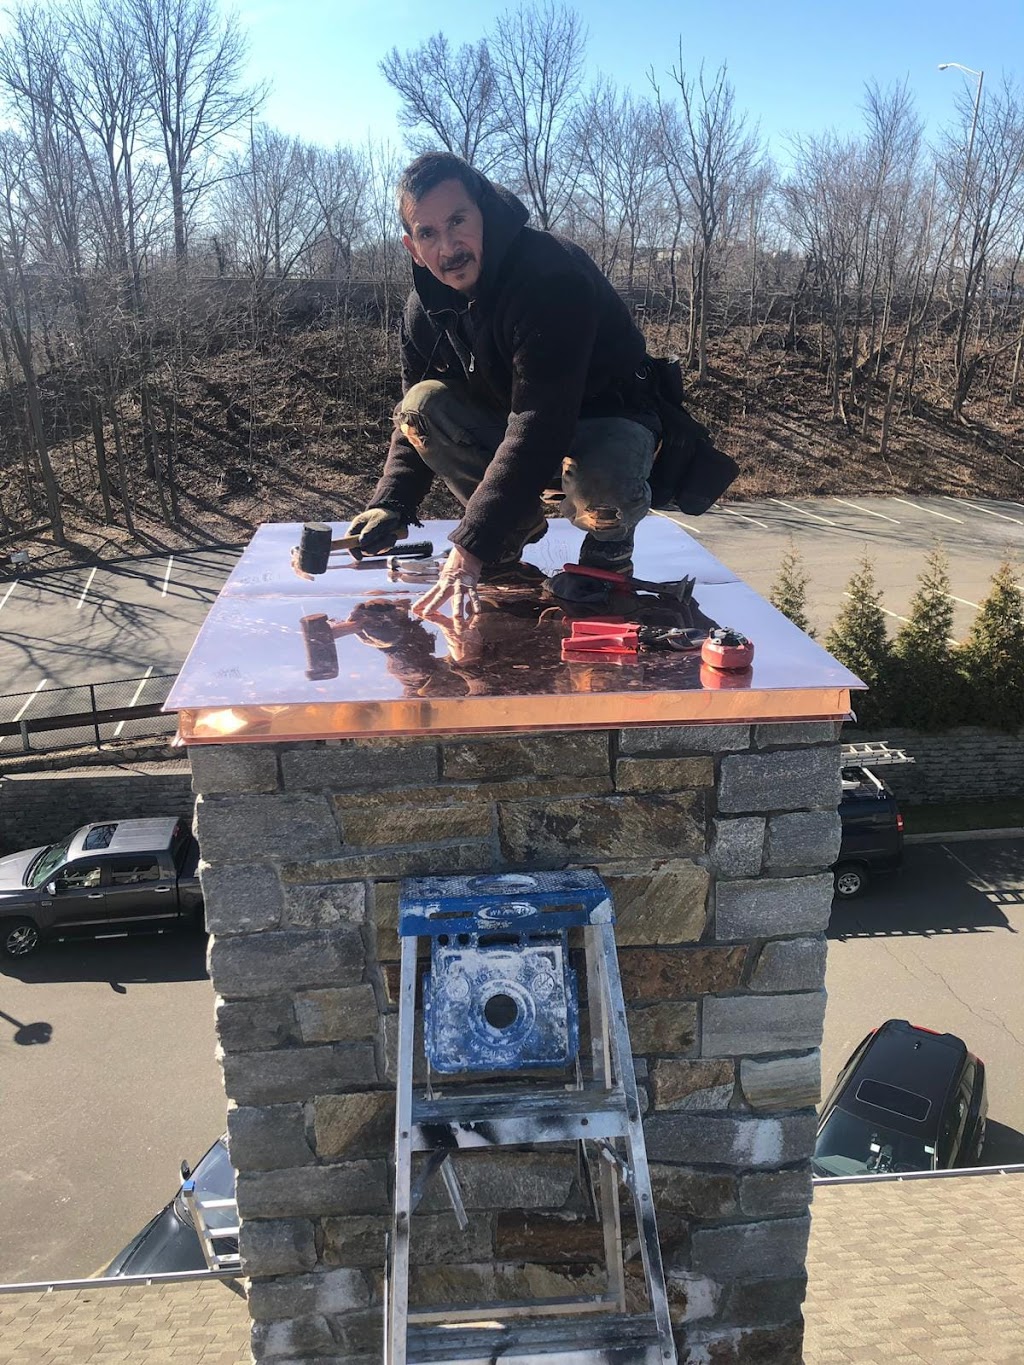 Reyes Roof Construction llc (Roofingkings) | 12 Dunican Ave, Naugatuck, CT 06770 | Phone: (203) 822-0448